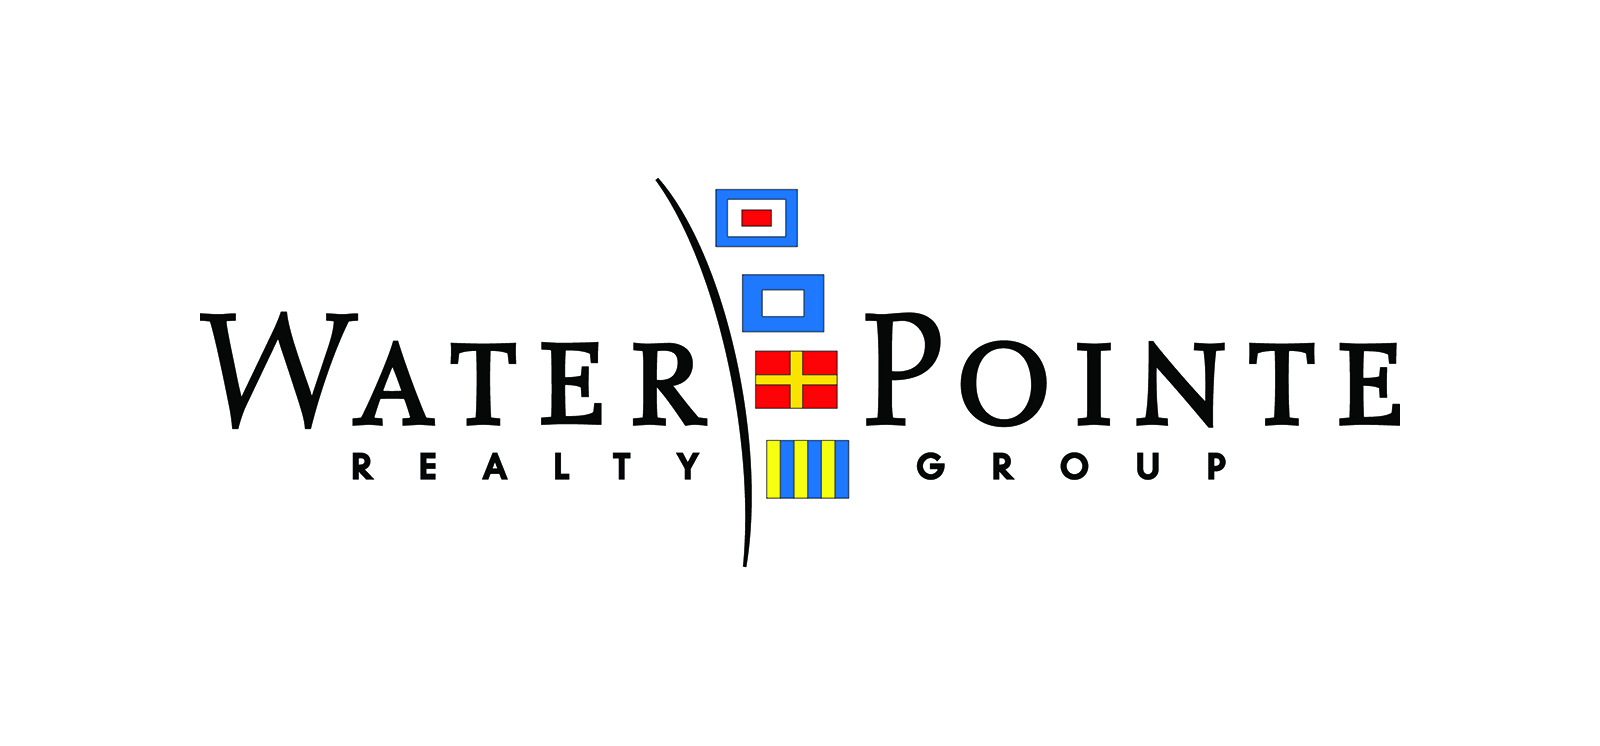 Anniversary Update: New Venture to Form Powerhouse Team Under Water Pointe Realty Group